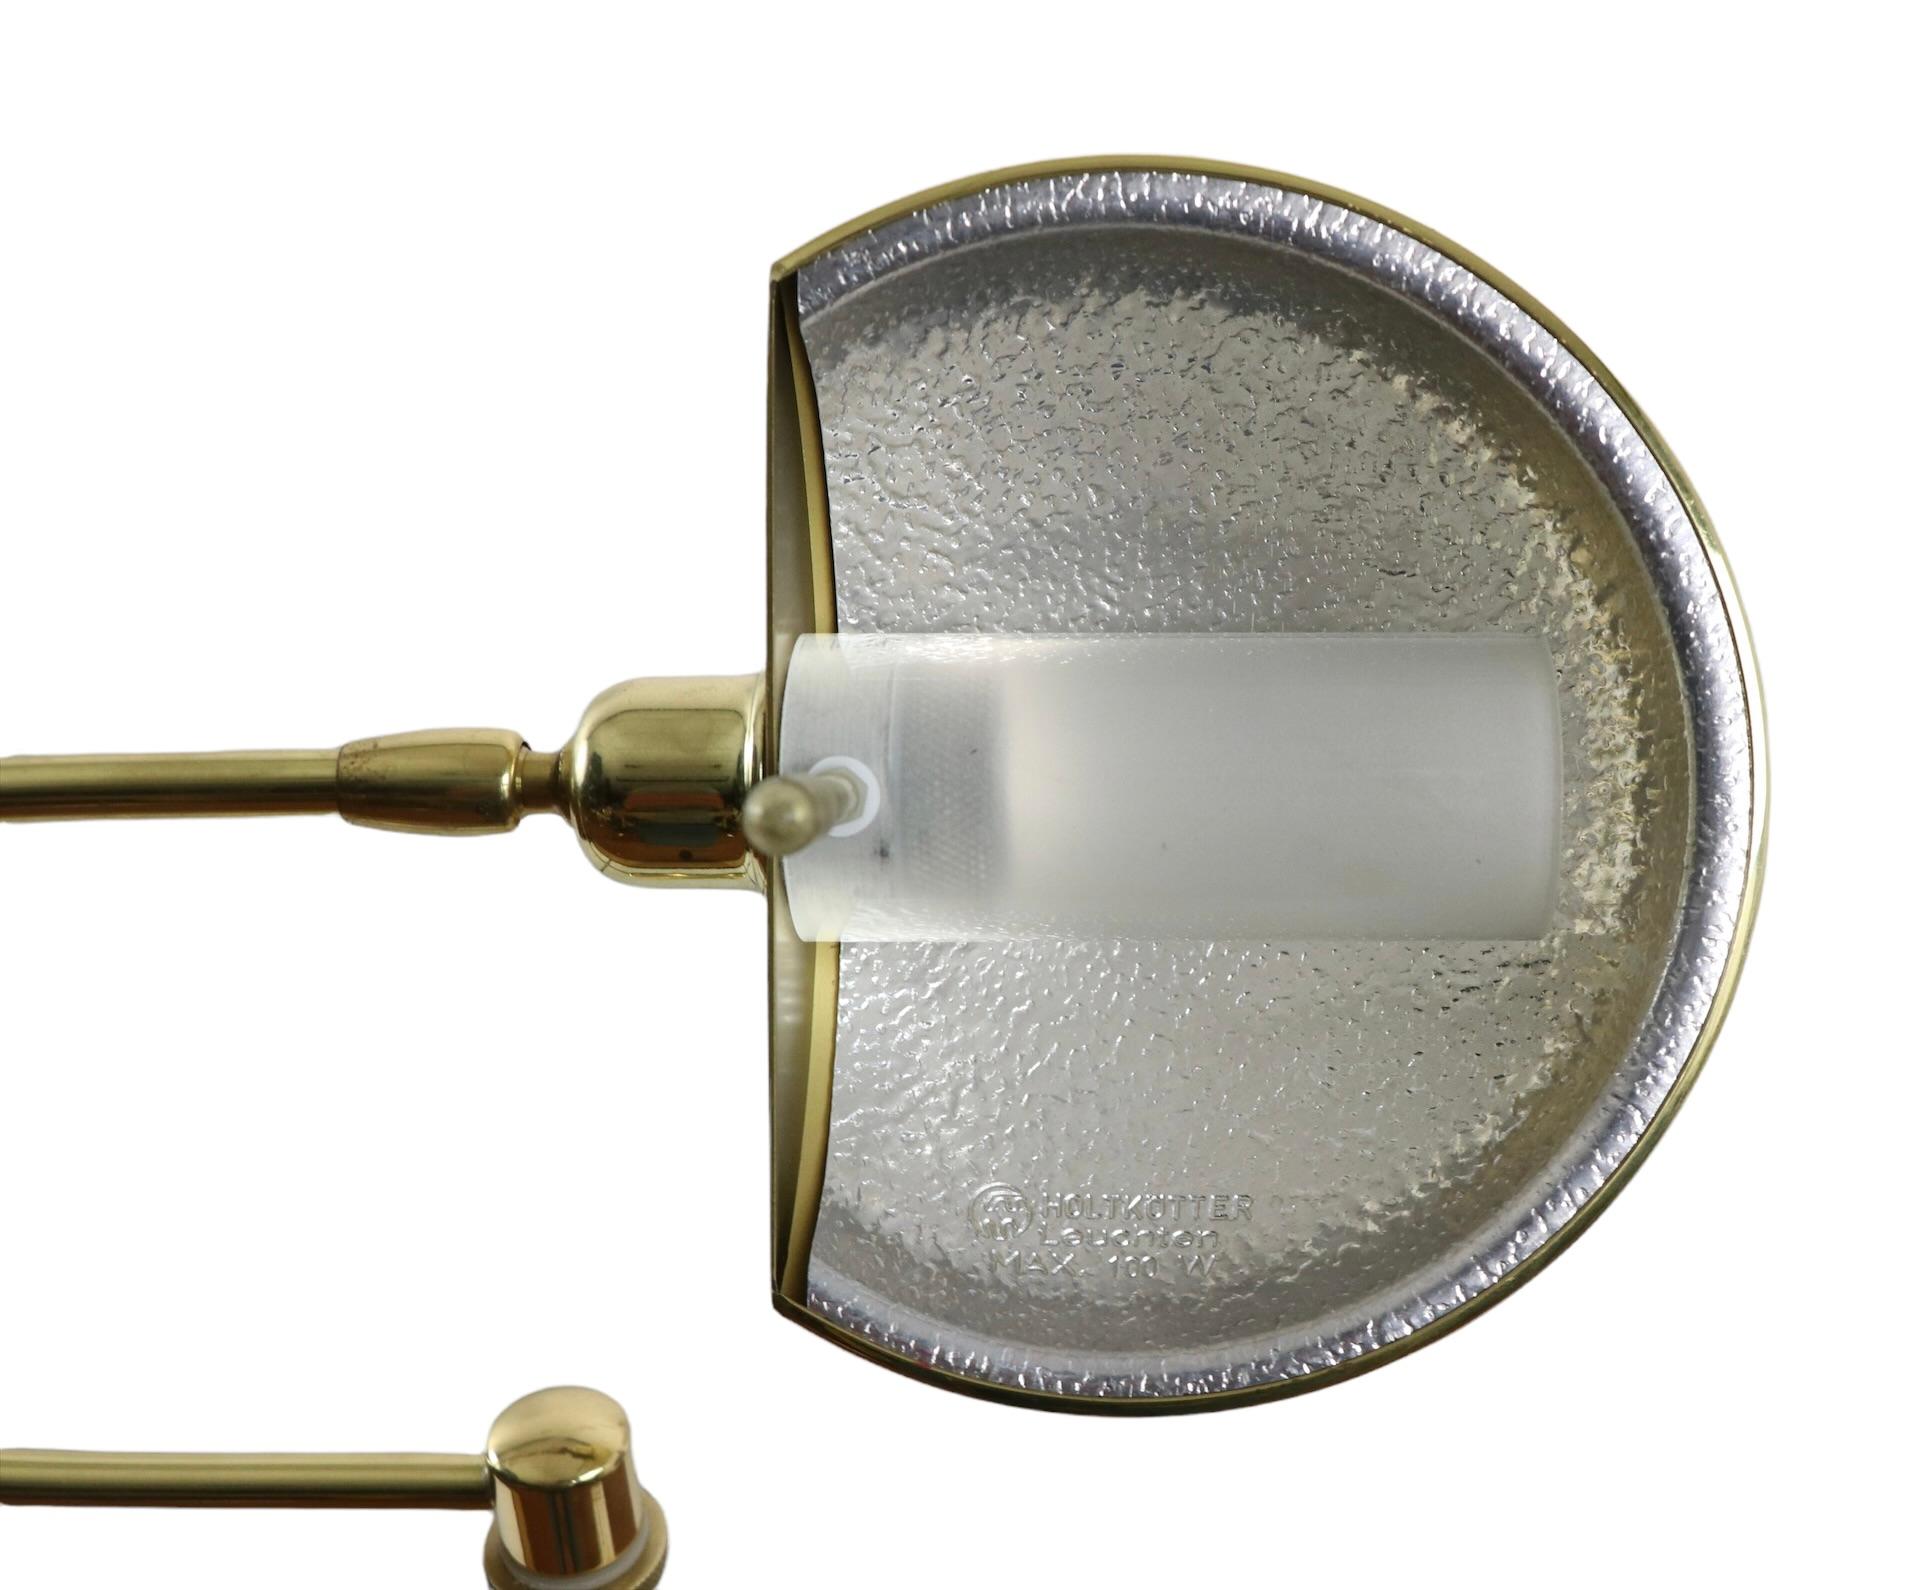 Exceptional brass pharmacy style floor lamp, Made in Germany by Holtkotter, circa 1980's. The lamp features a horizontal flex arm with stylized joinery, which swivels on the vertical post. the arm swivels and the hood shade tilts to position and